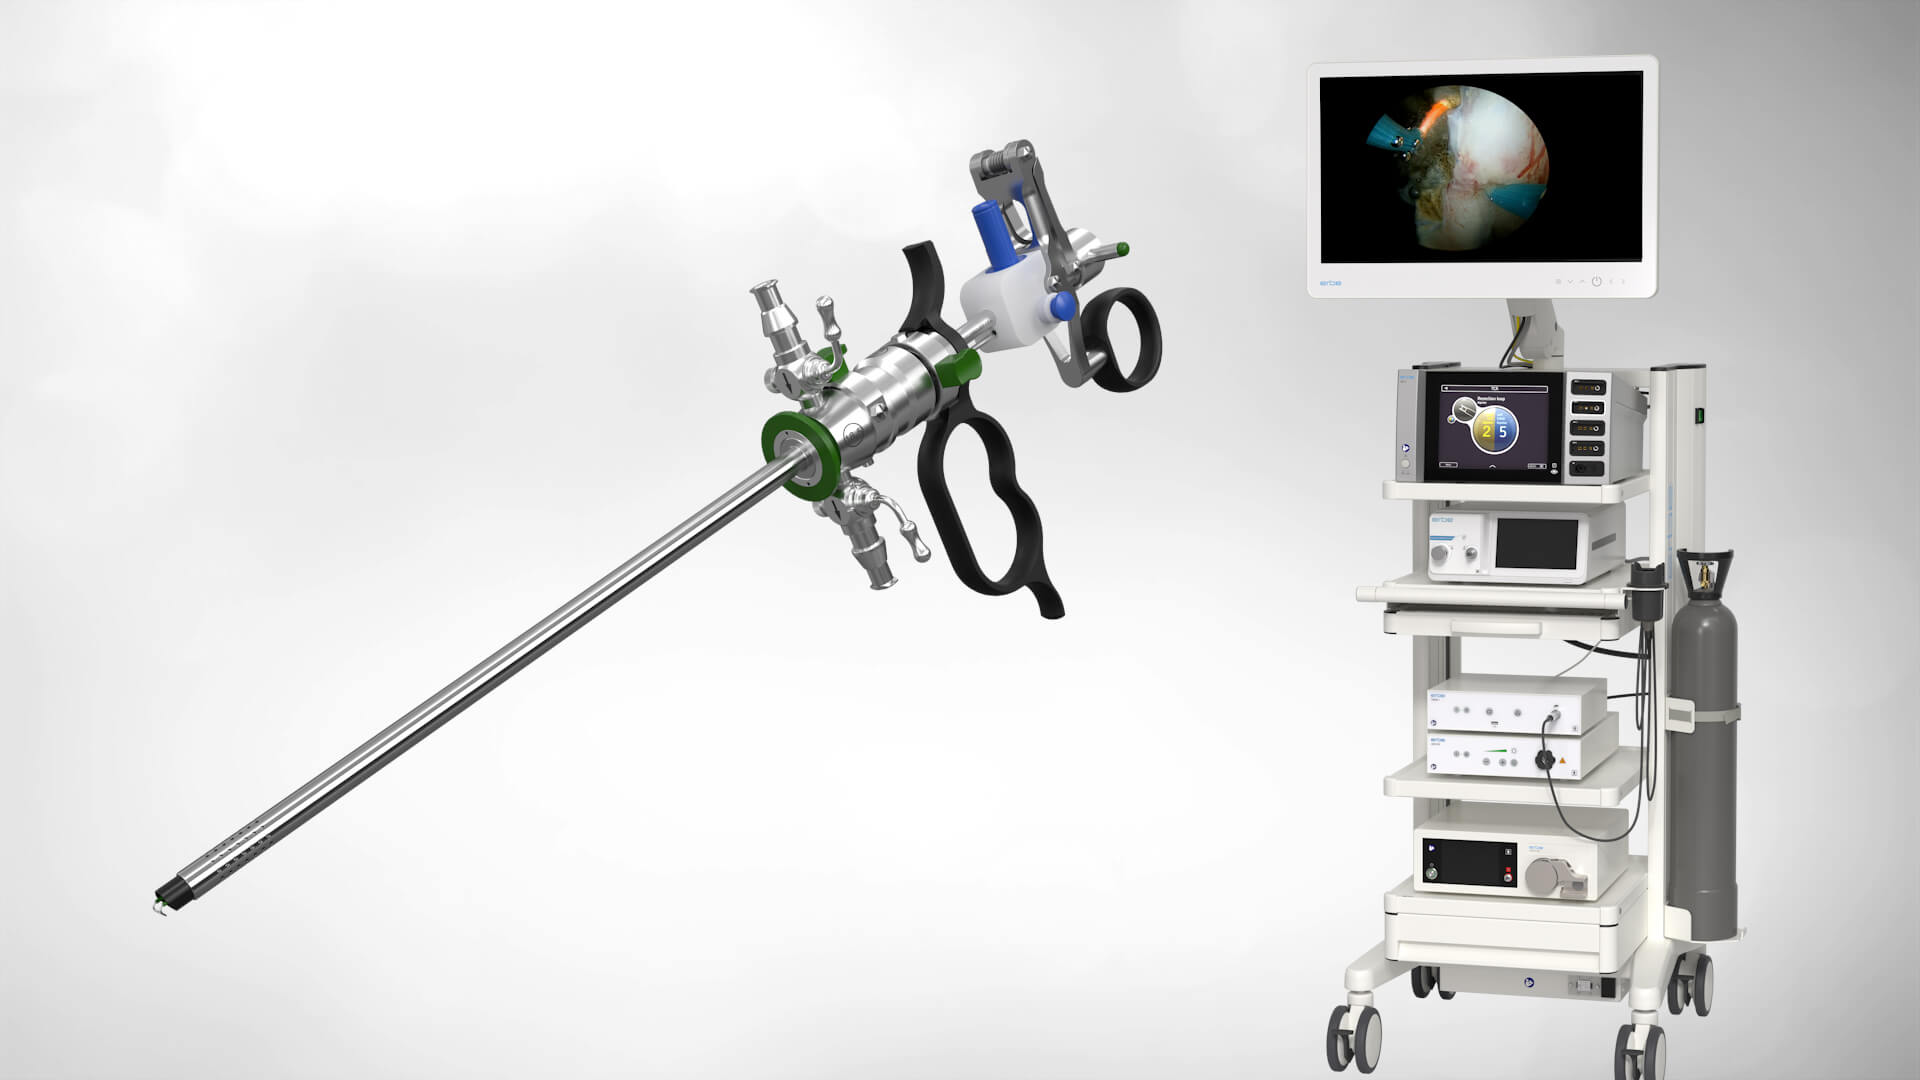 Complete system for hysteroscopy, cystoscopy, and resections with VIRON 1 full HD imaging system and VIO 3 electrosurgical unit